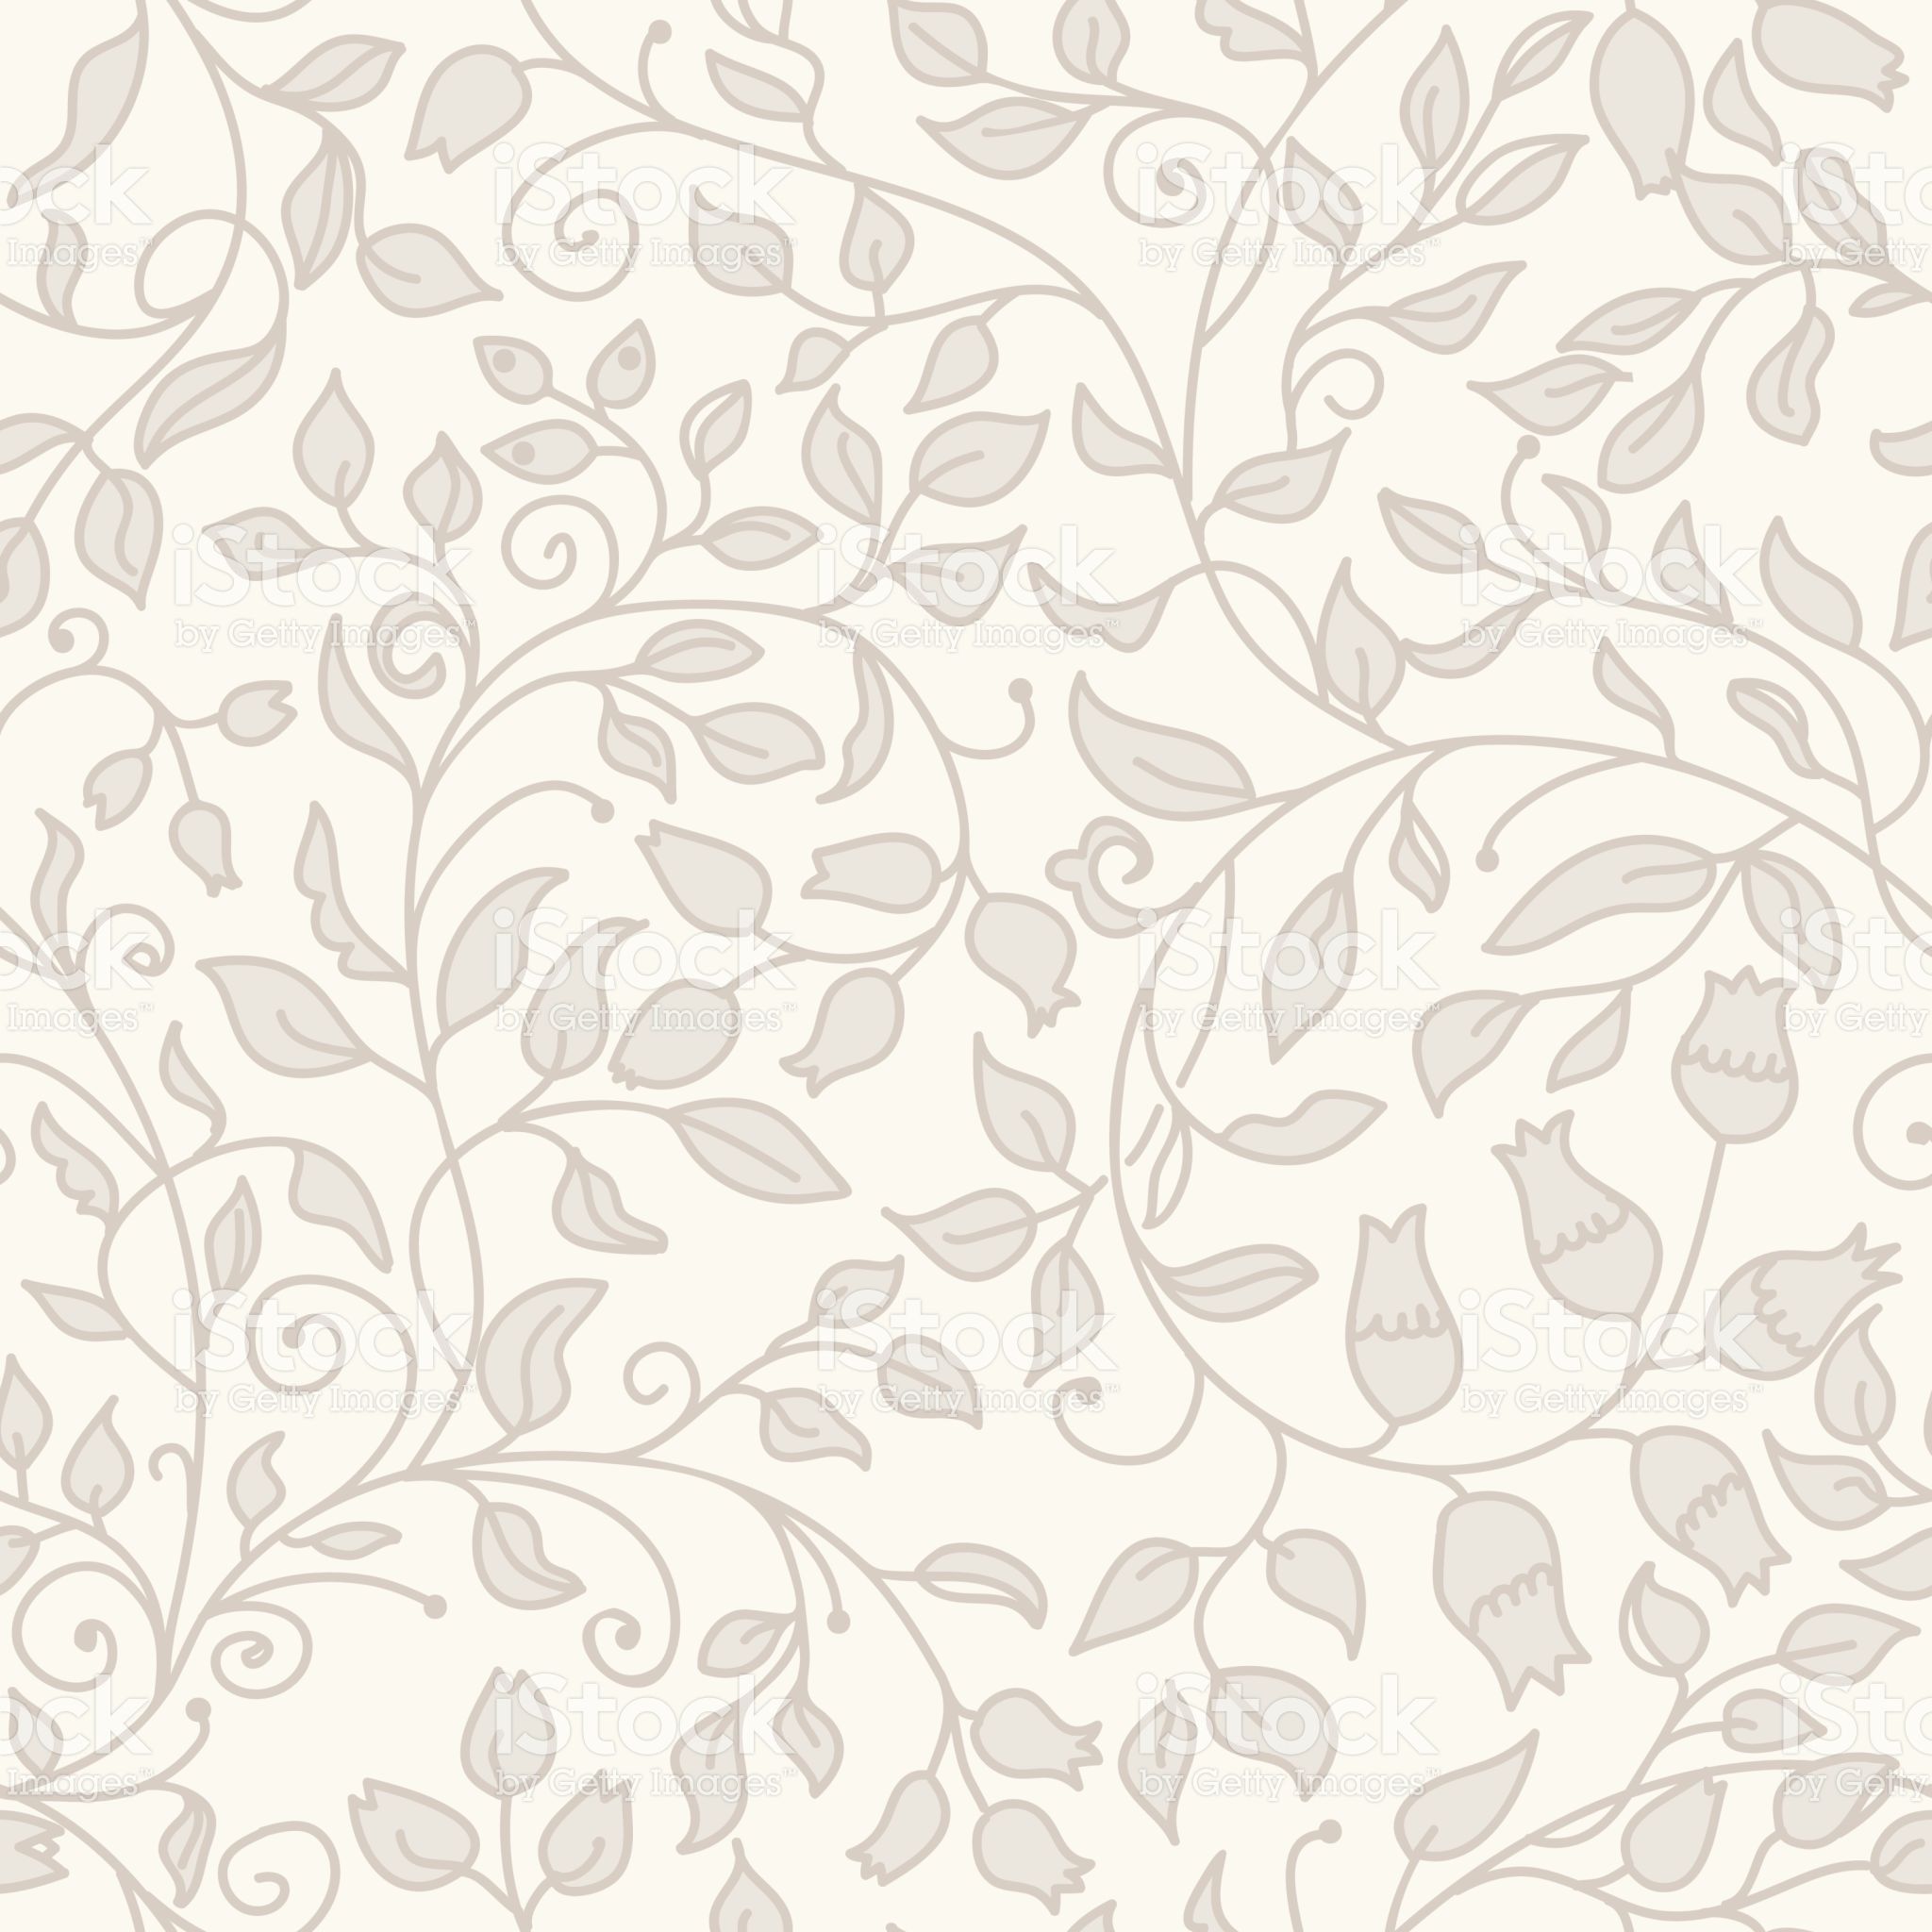 Seamless Floral Vector Background Royalty